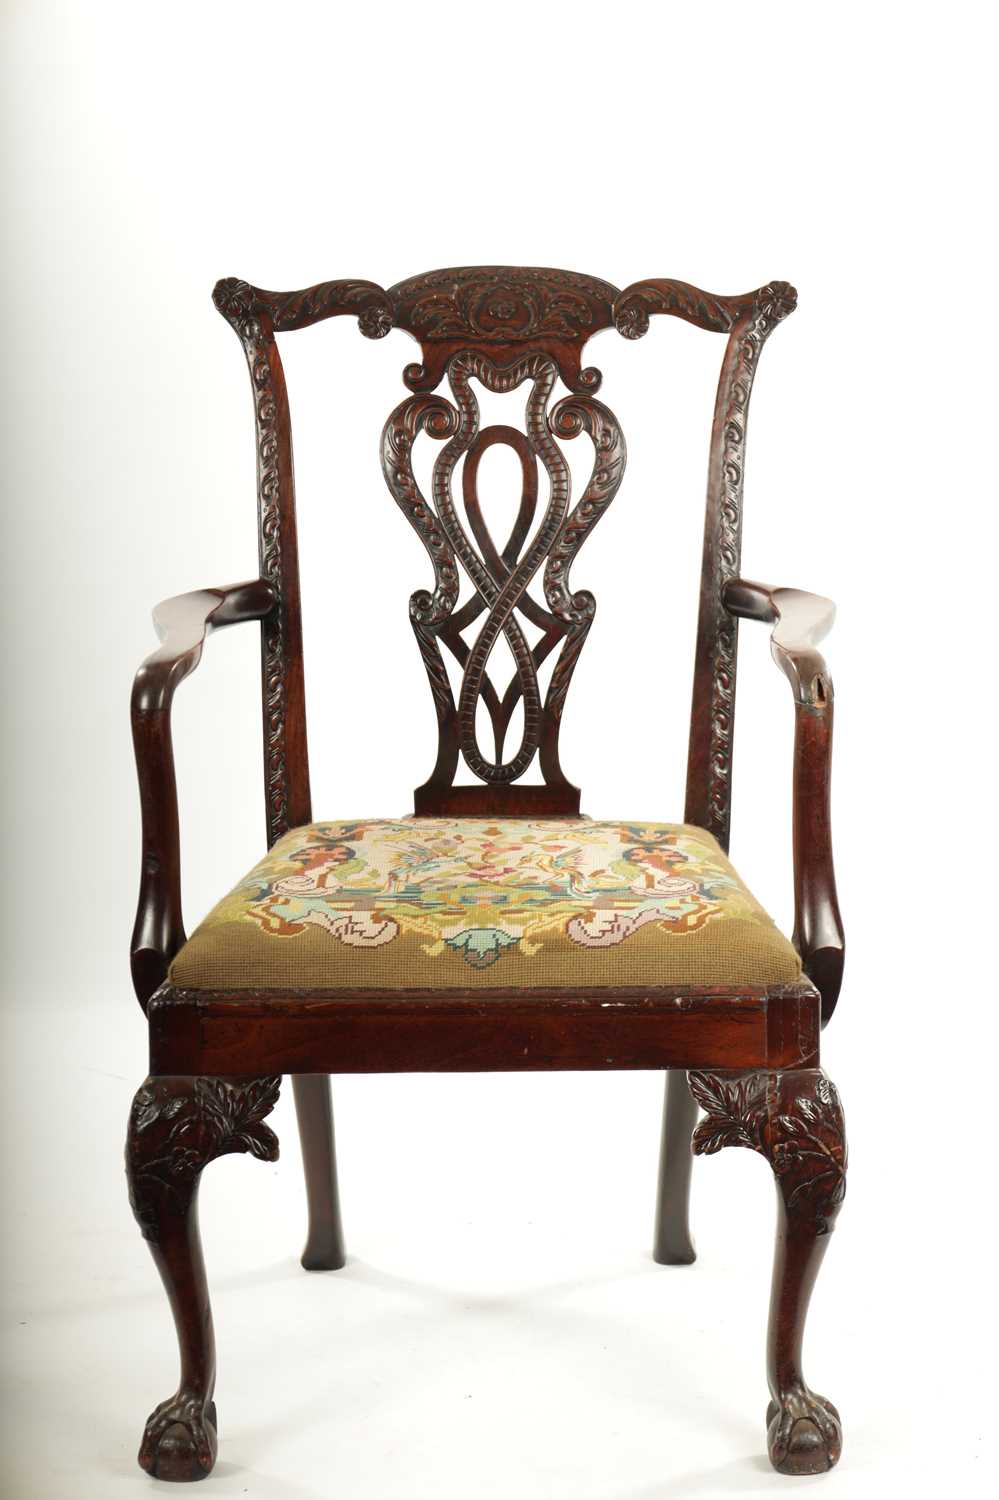 A FINE 18TH CENTURY CHIPPENDALE STYLE MAHOGANY ARMCHAIR - Image 2 of 6